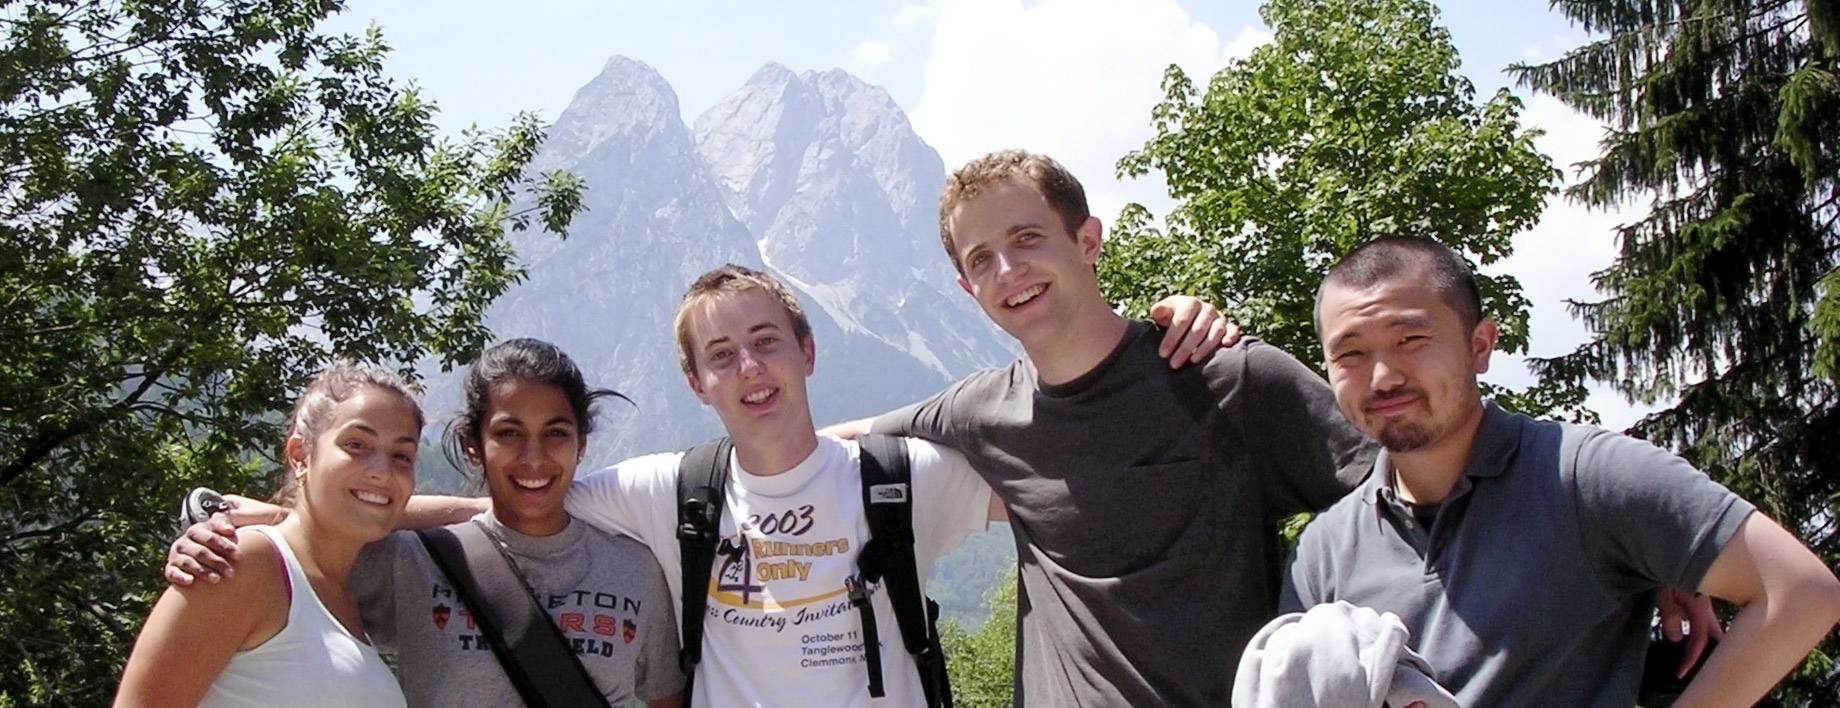 Princeton-in-Munich students in the Alps